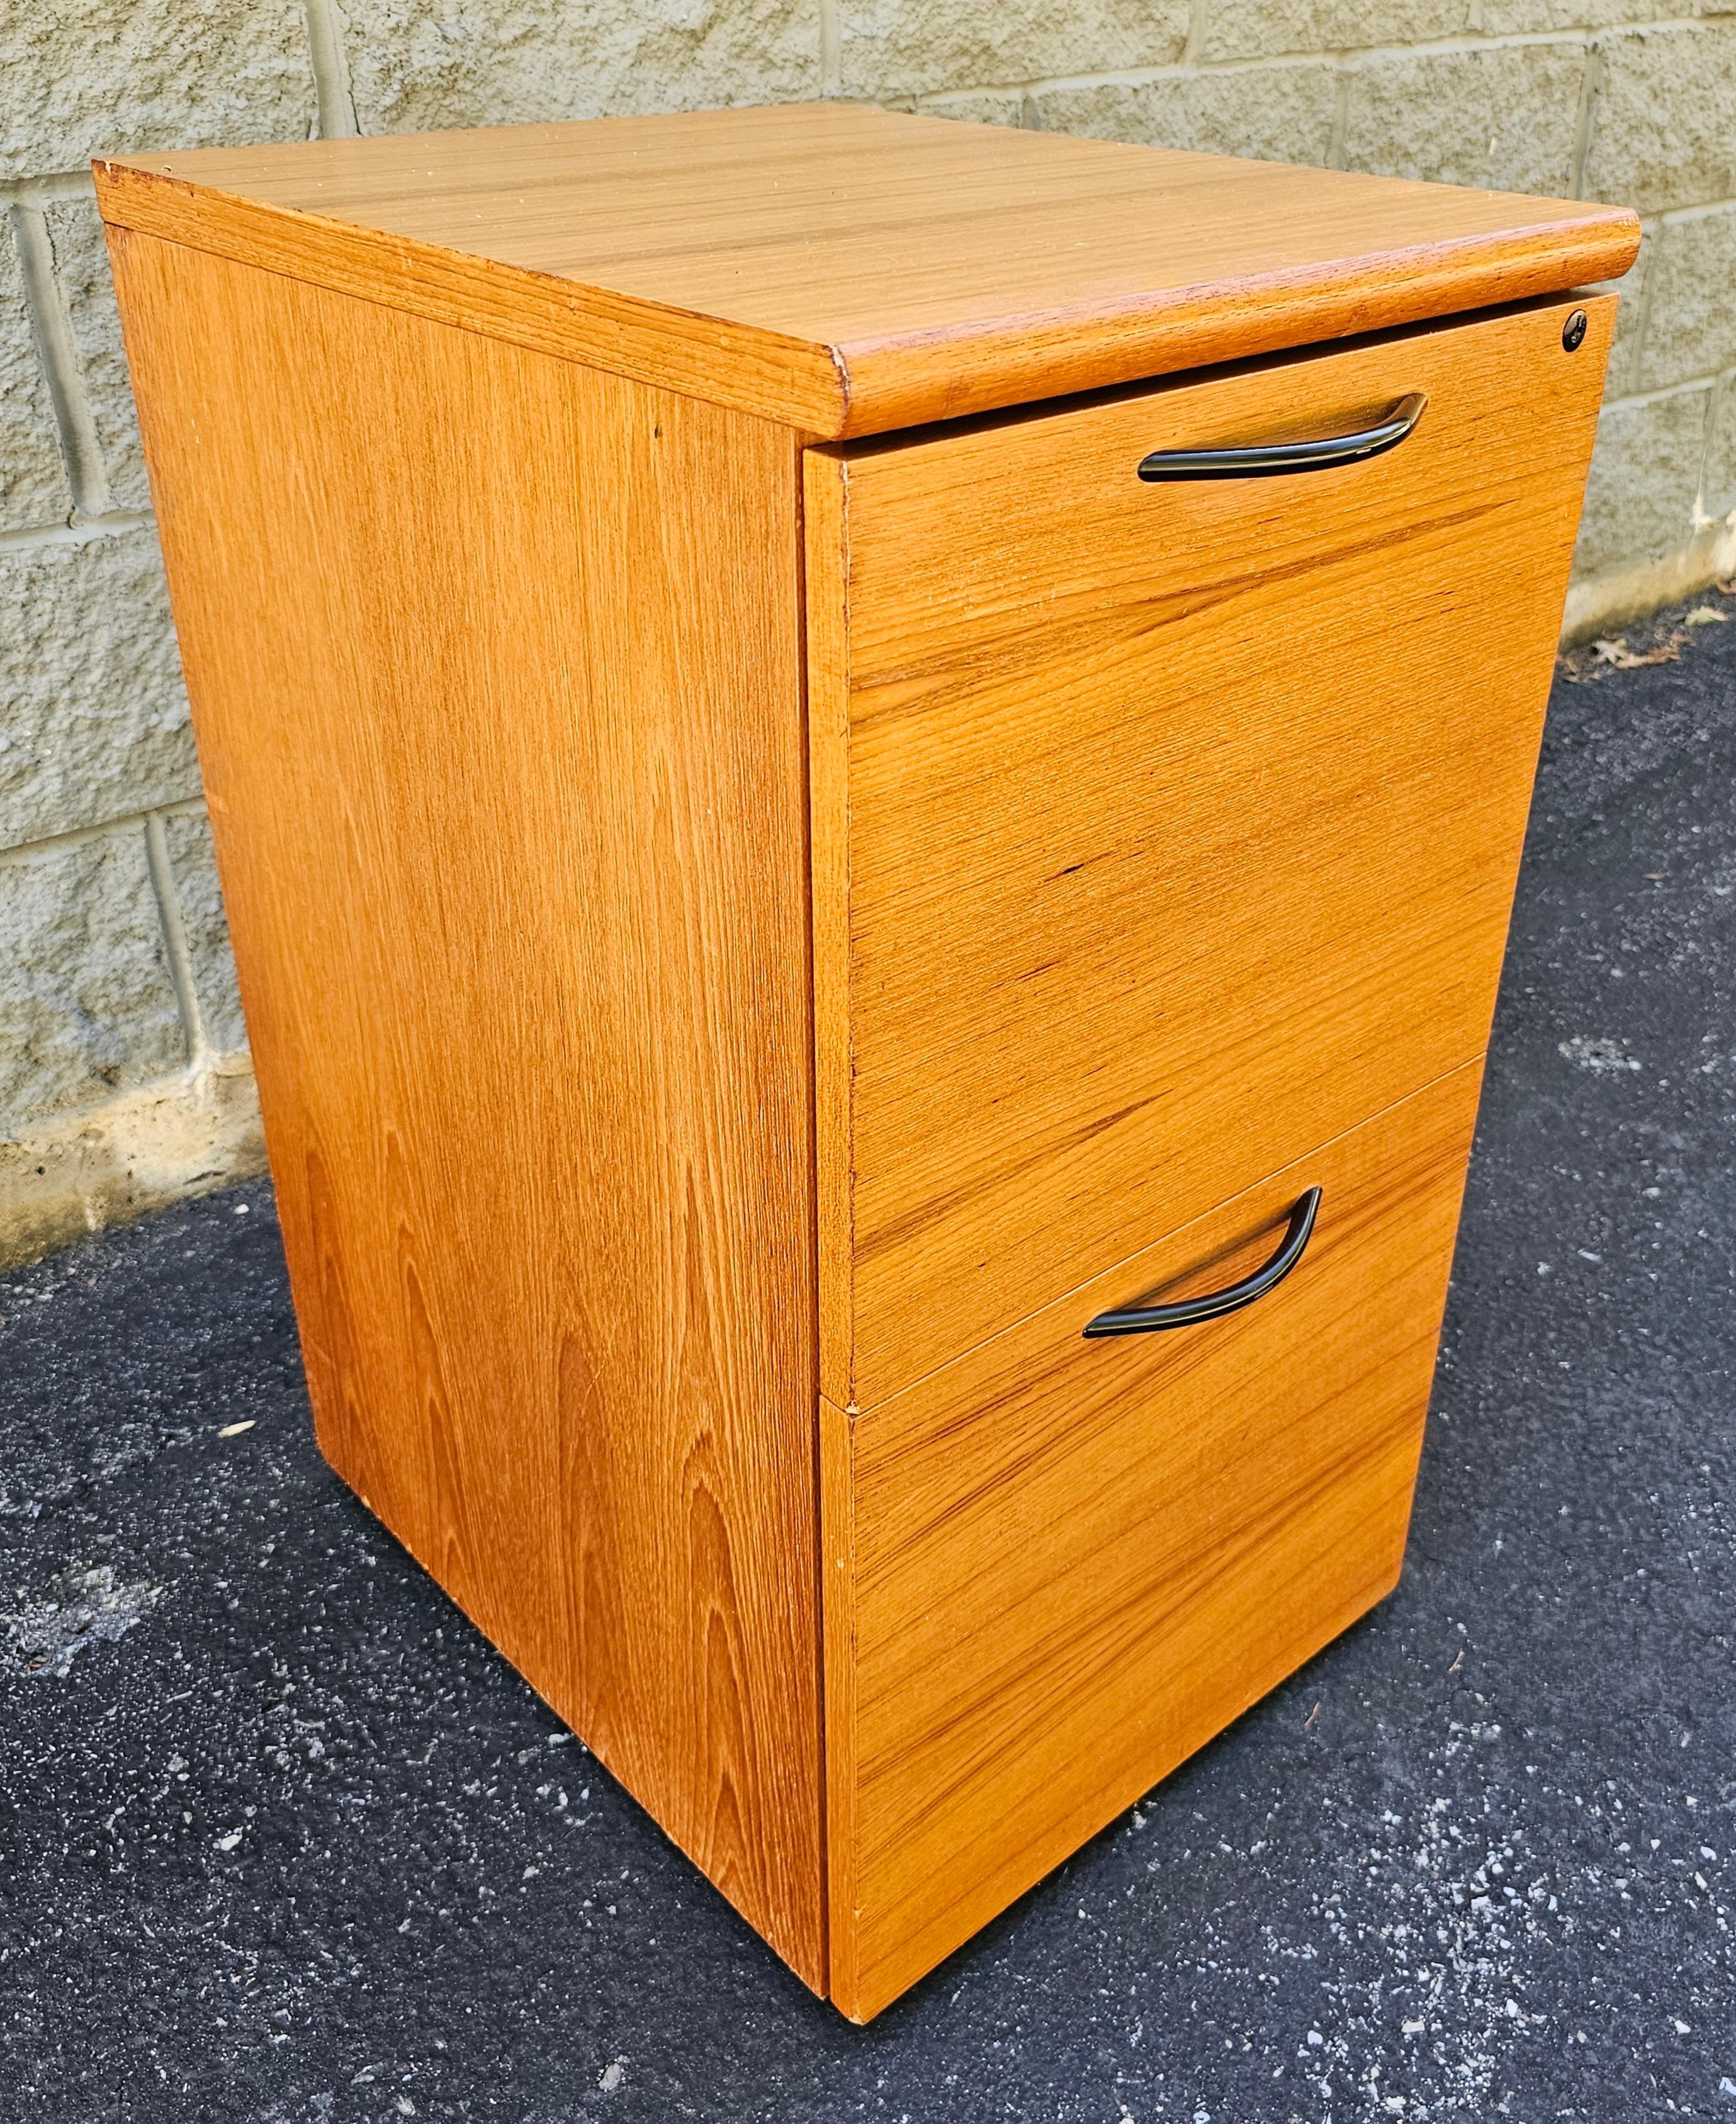 A Late 20th Century Danish Modern Teak Two-Drawer Rolling Filing Cabinet attributed to Bent Silberg Mobler. 
Built-in file folders rails and 5 rolling casters. Very good vintage condition. Key not present. Measures 16